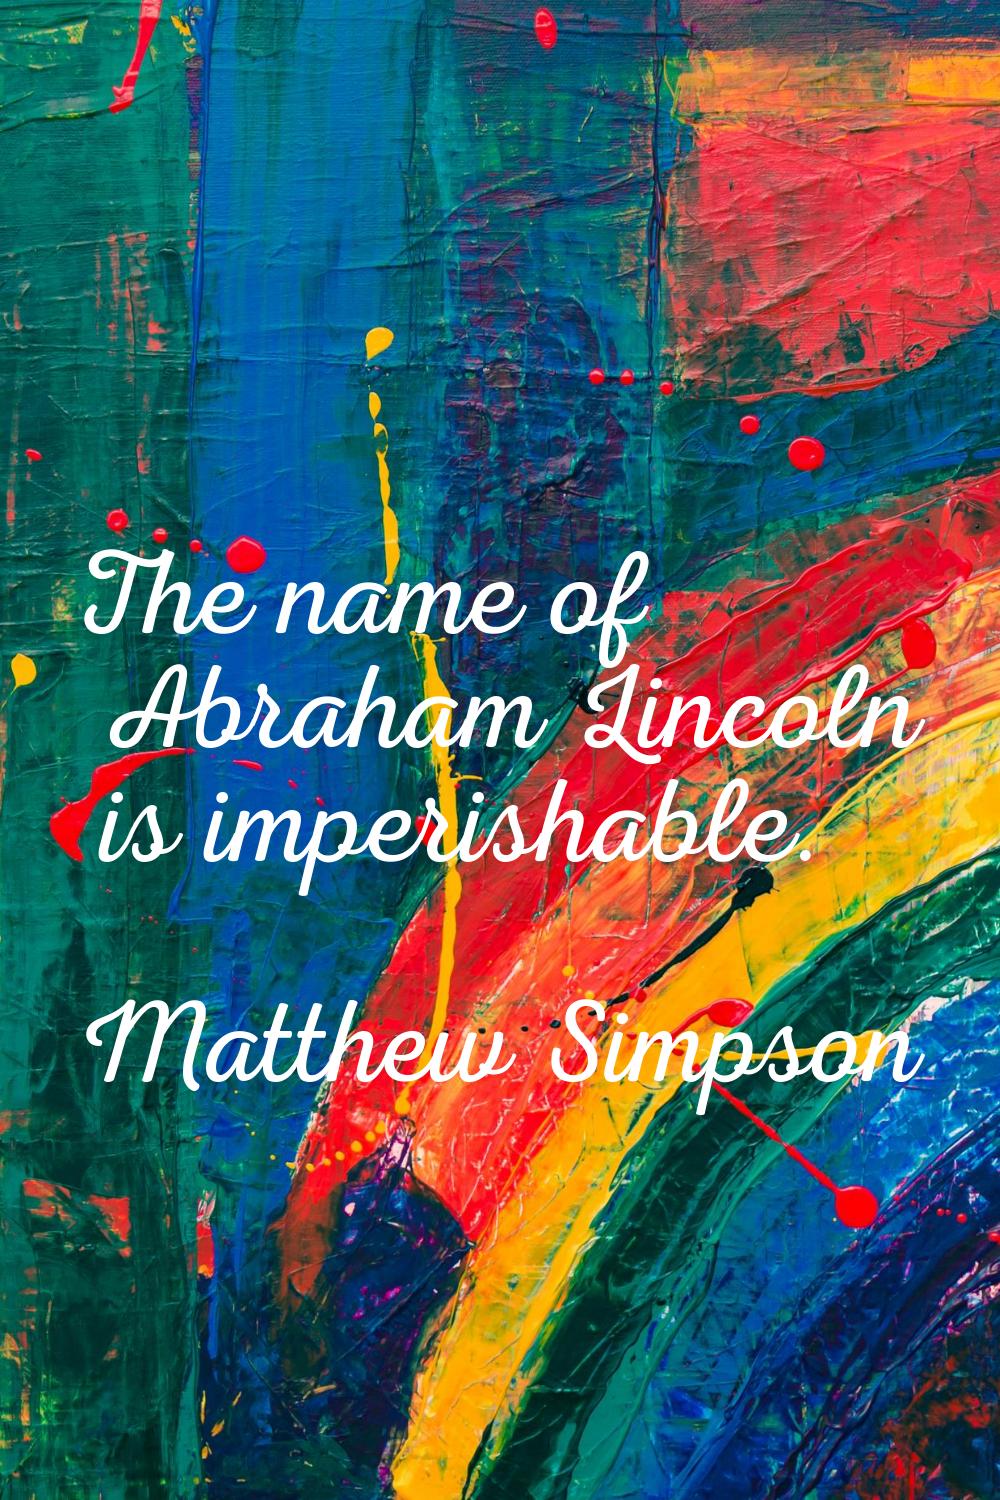 The name of Abraham Lincoln is imperishable.